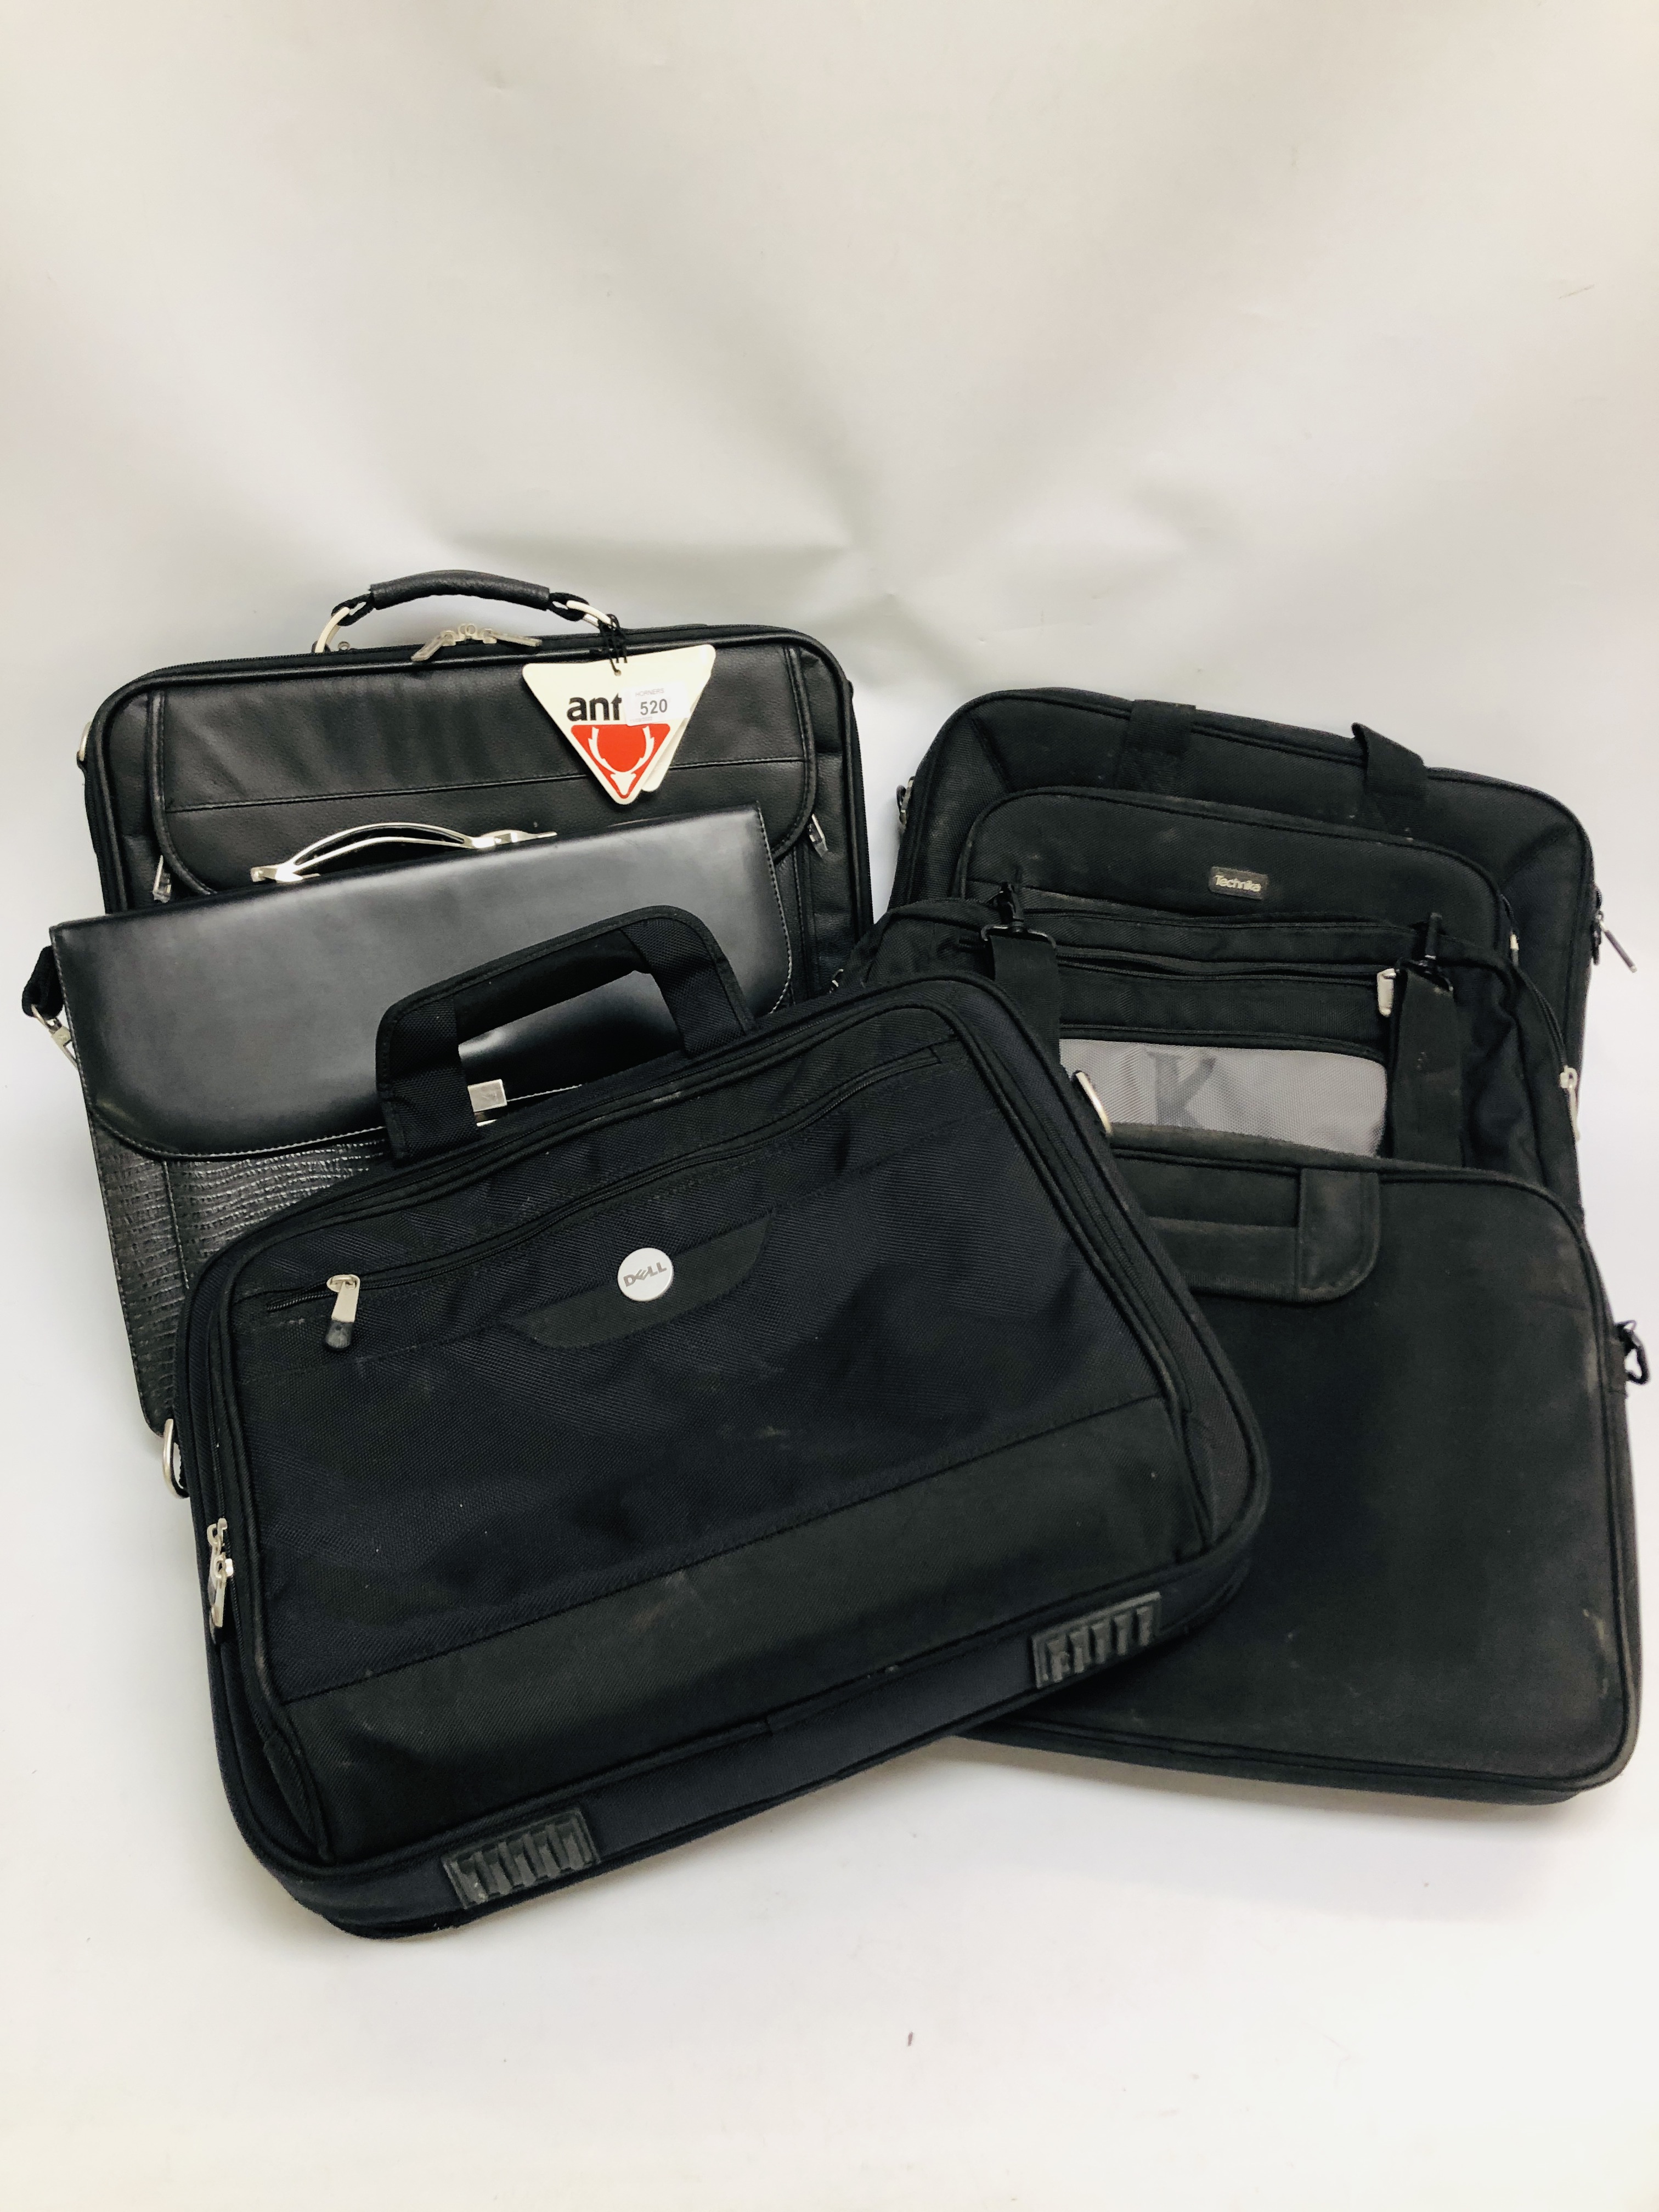 SIX LAPTOP BAGS TO INCLUDE ANTLER, DELL, DUNHILL ETC.